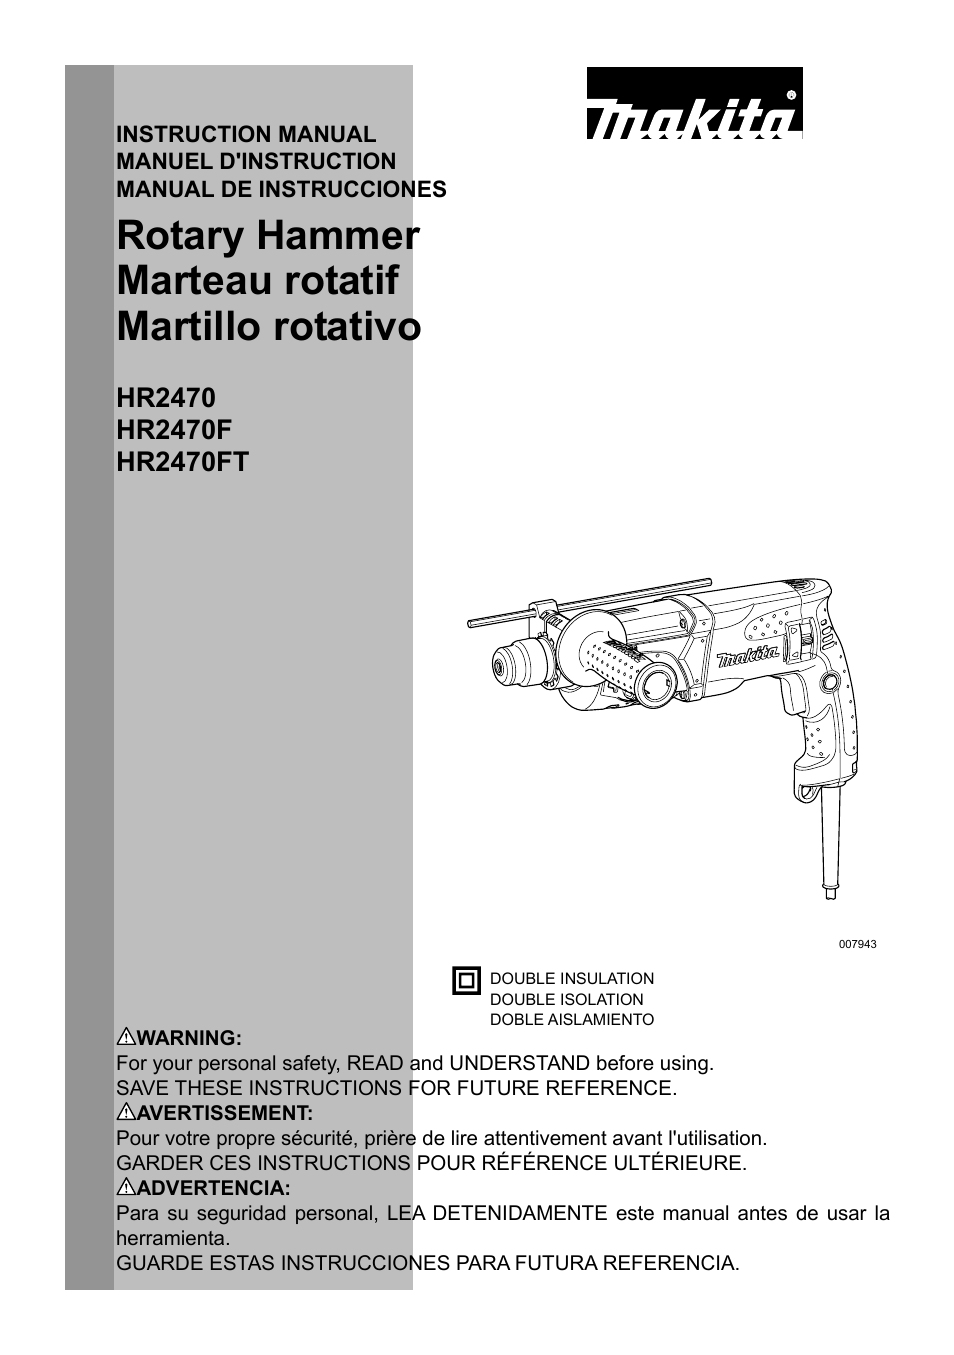 Makita HR2470 User Manual | 28 pages | Also for: HR2470FT